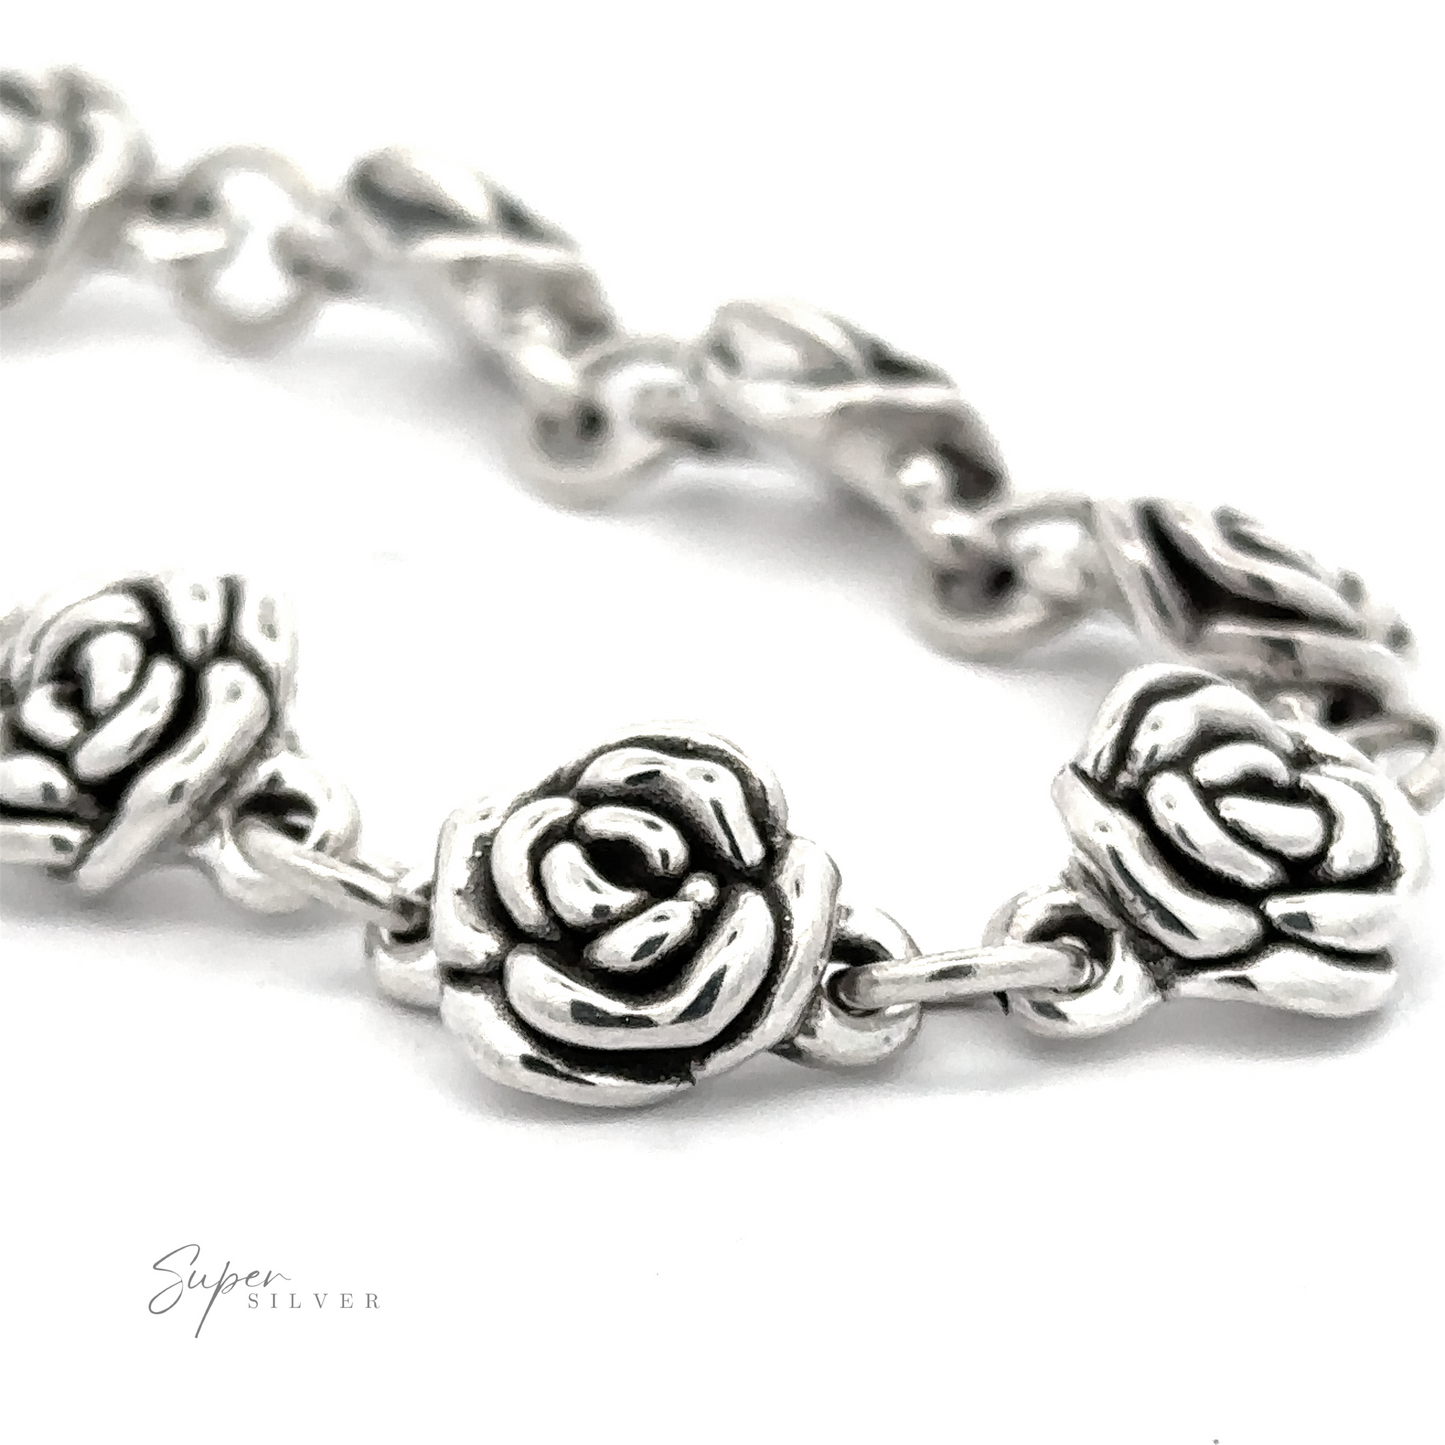 
                  
                    Close-up image of a Chic Link Rose Bracelet featuring intricately designed rose-shaped links, giving it a vintage vibe. The brand name "Super Silver" is seen in the bottom left corner, highlighting its .925 Sterling Silver quality.
                  
                